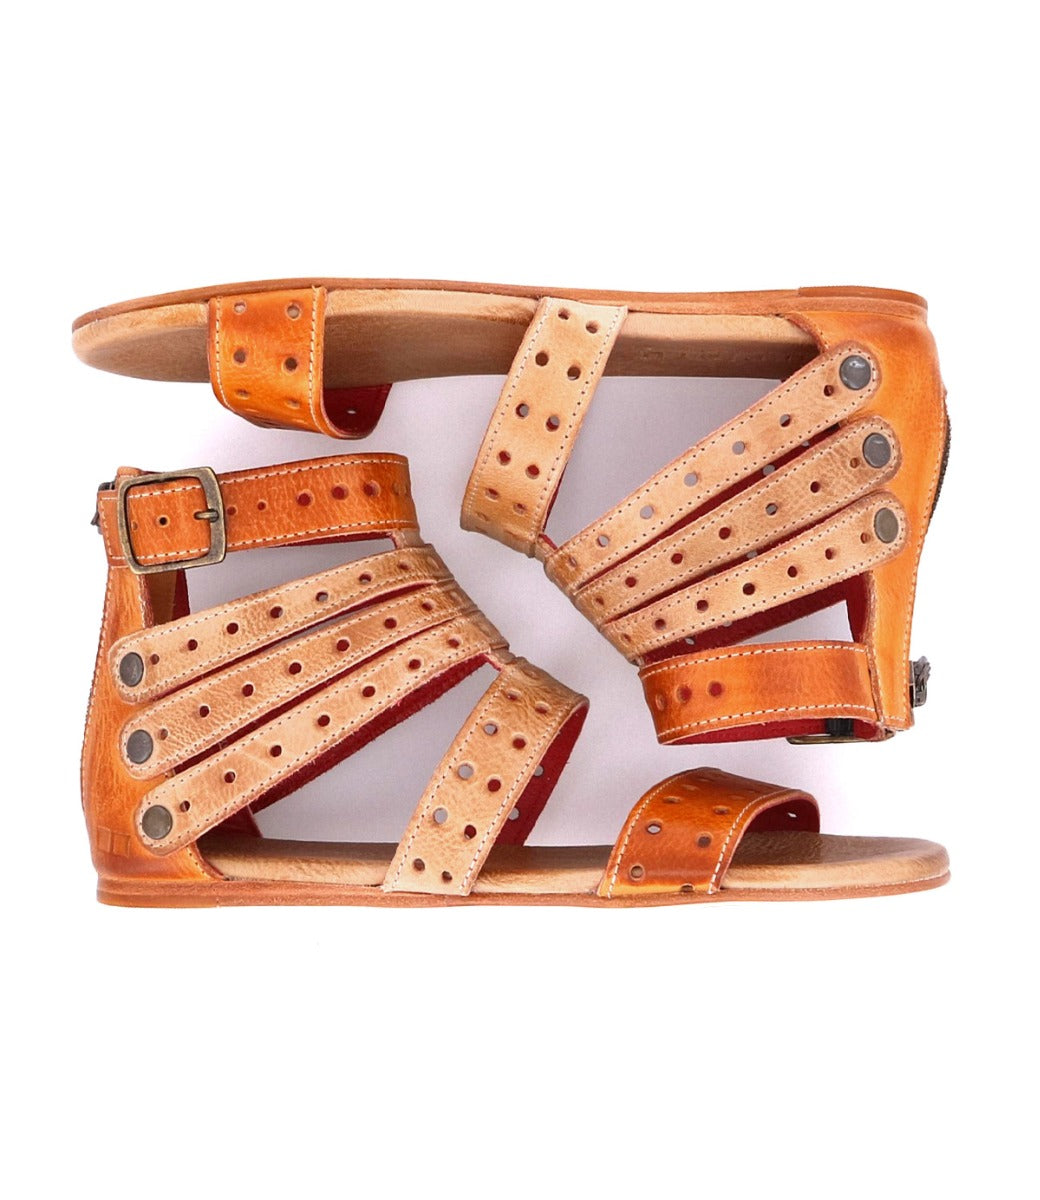 A pair of Artemis M tan sandals with straps by Bed Stu.